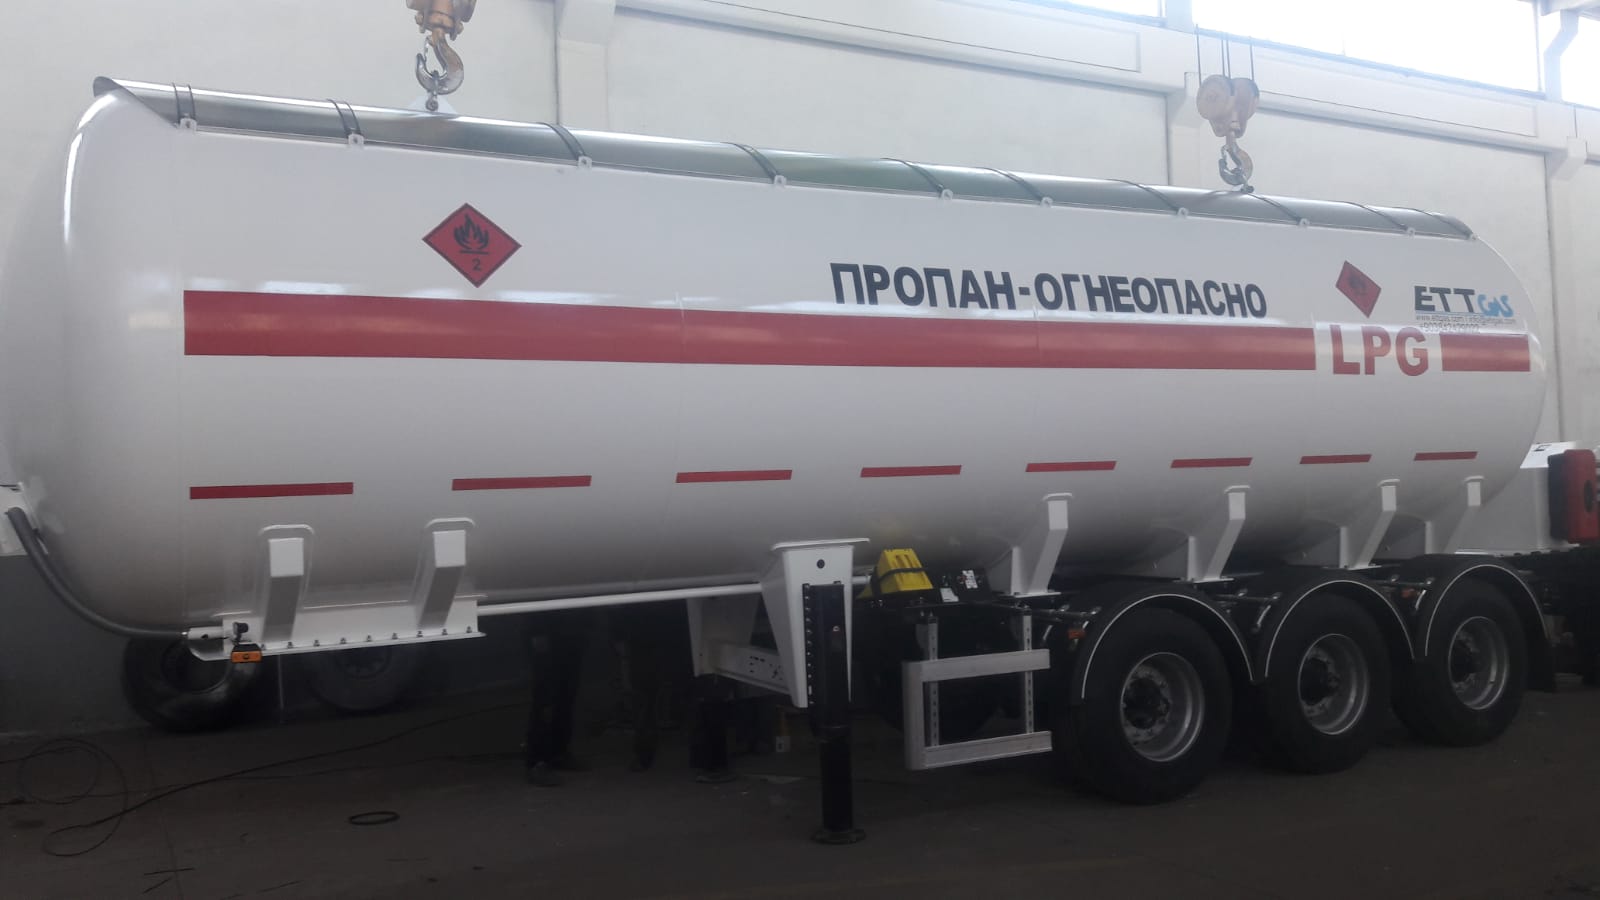 Another 40 m3 Lpg Trailer delivery to Kazakhistan